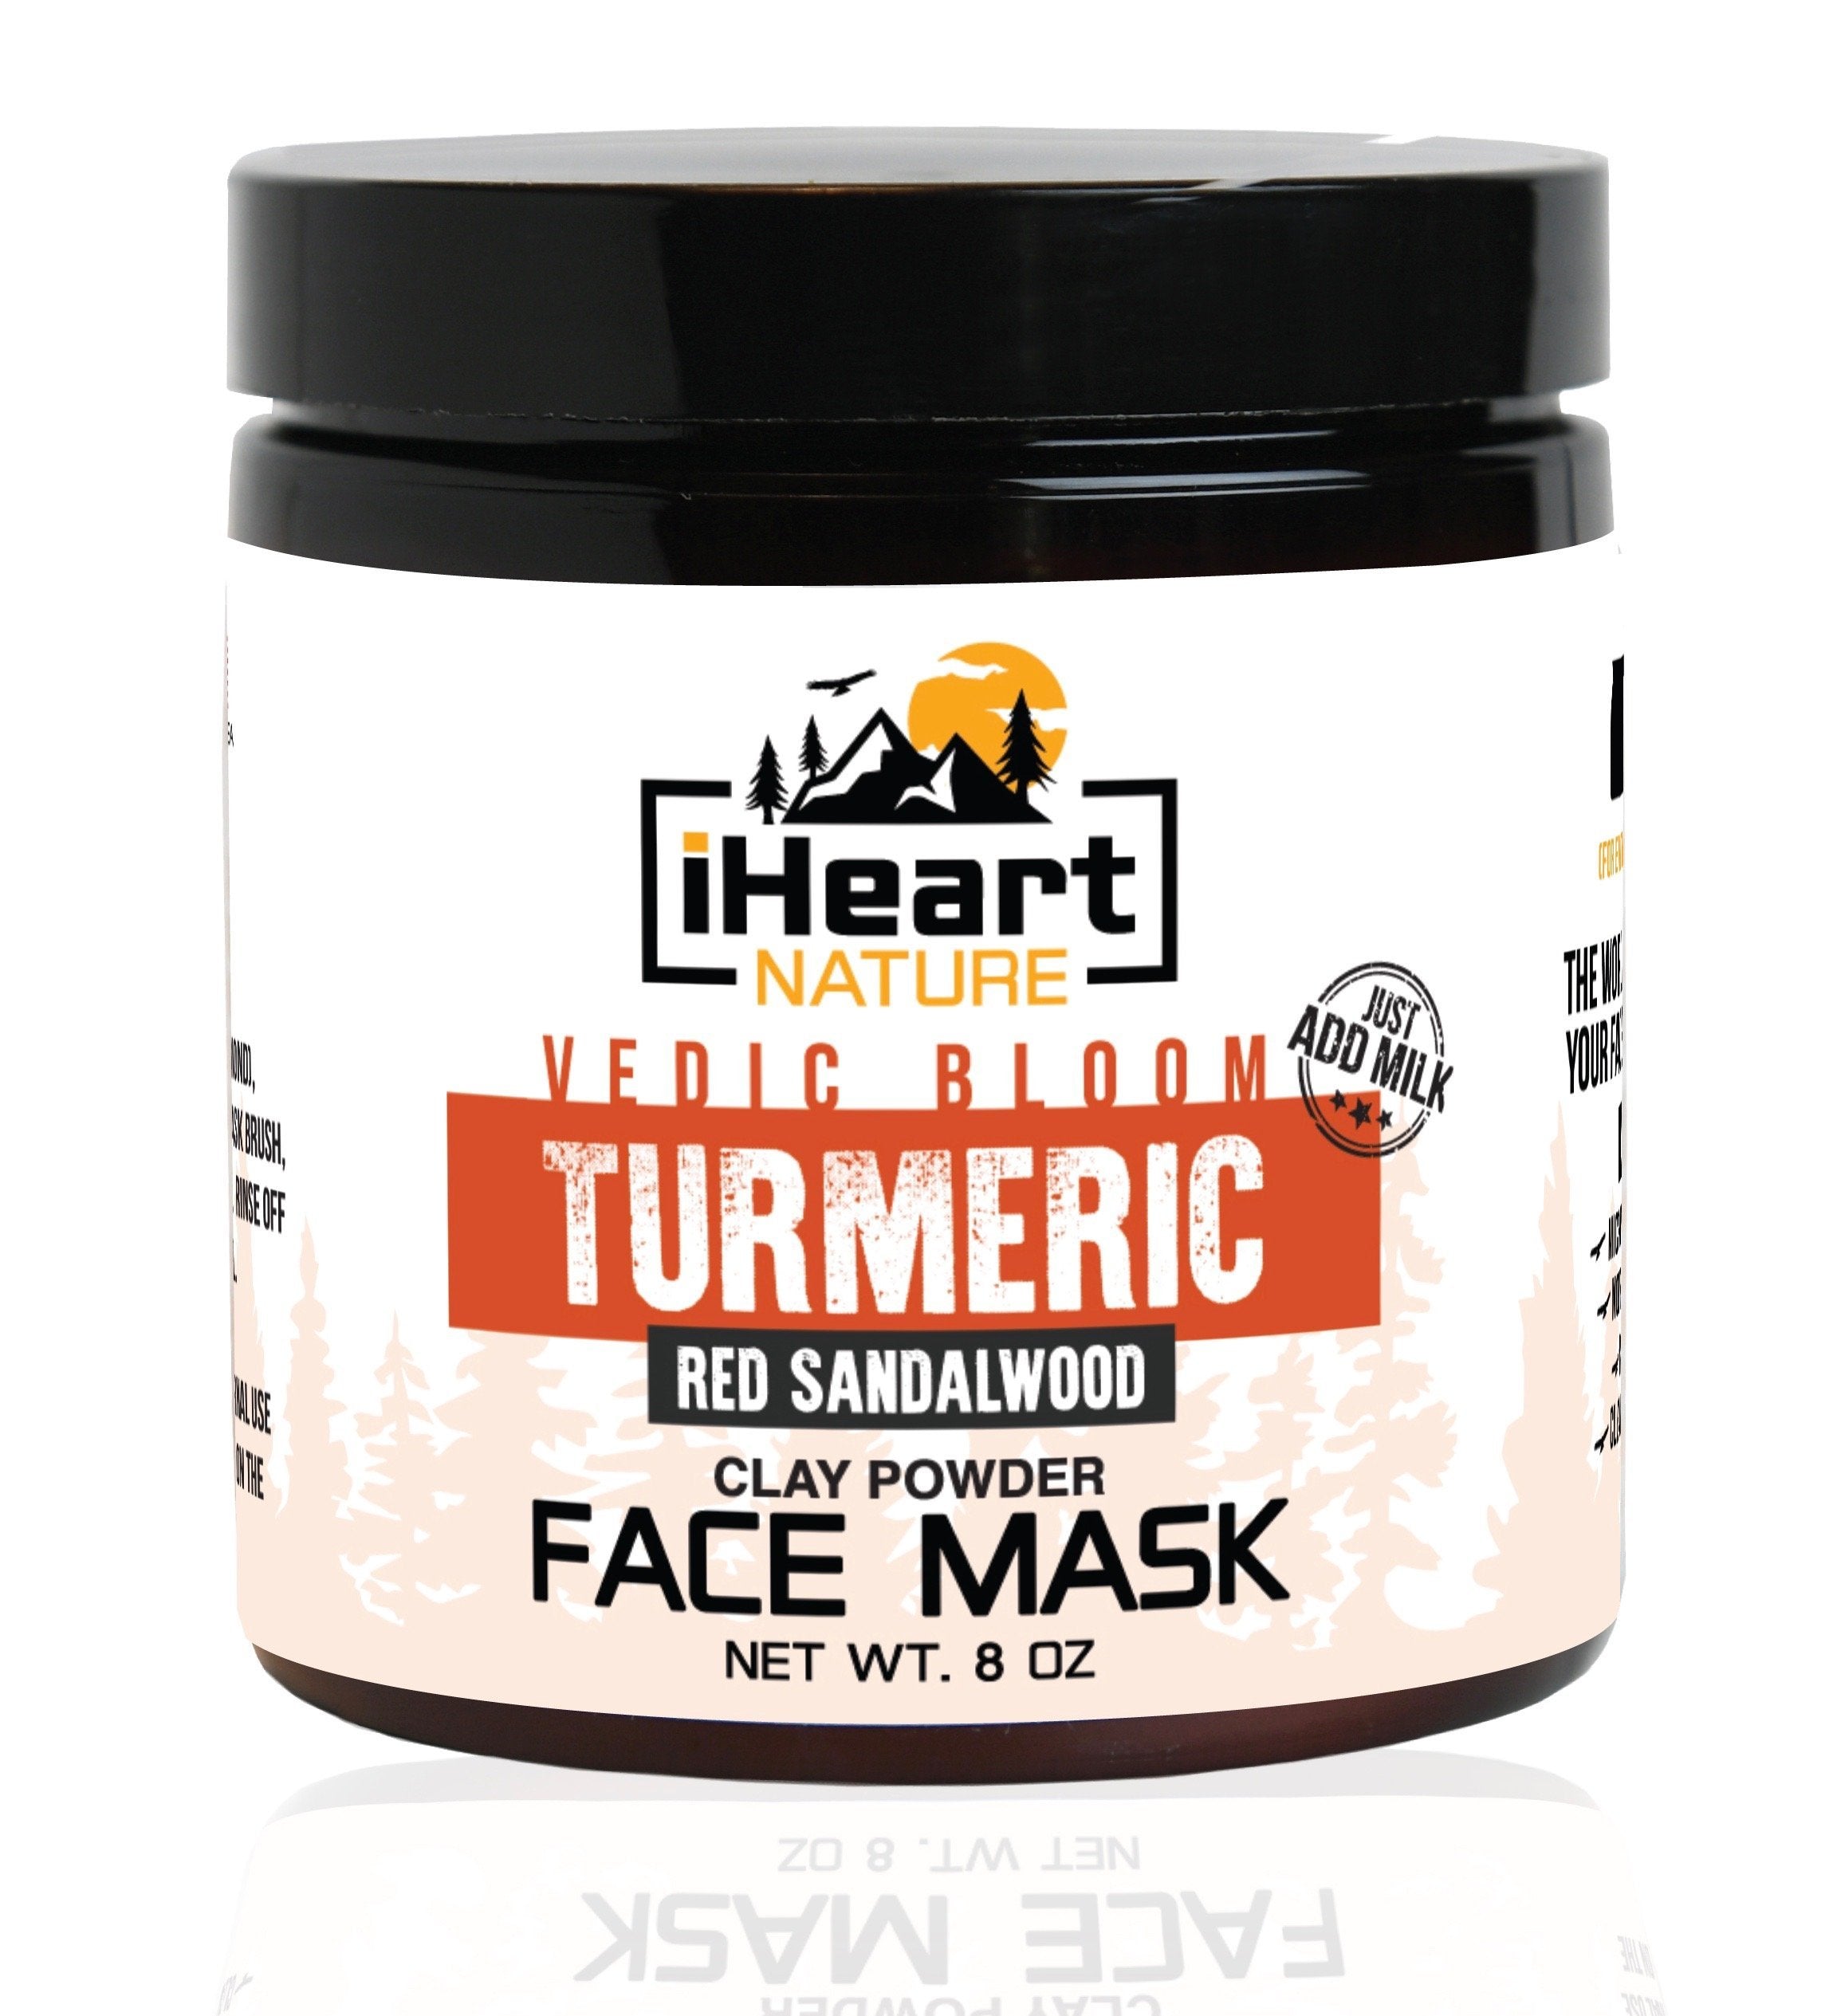 Natural Herbal Face Mask | iHeart Nature